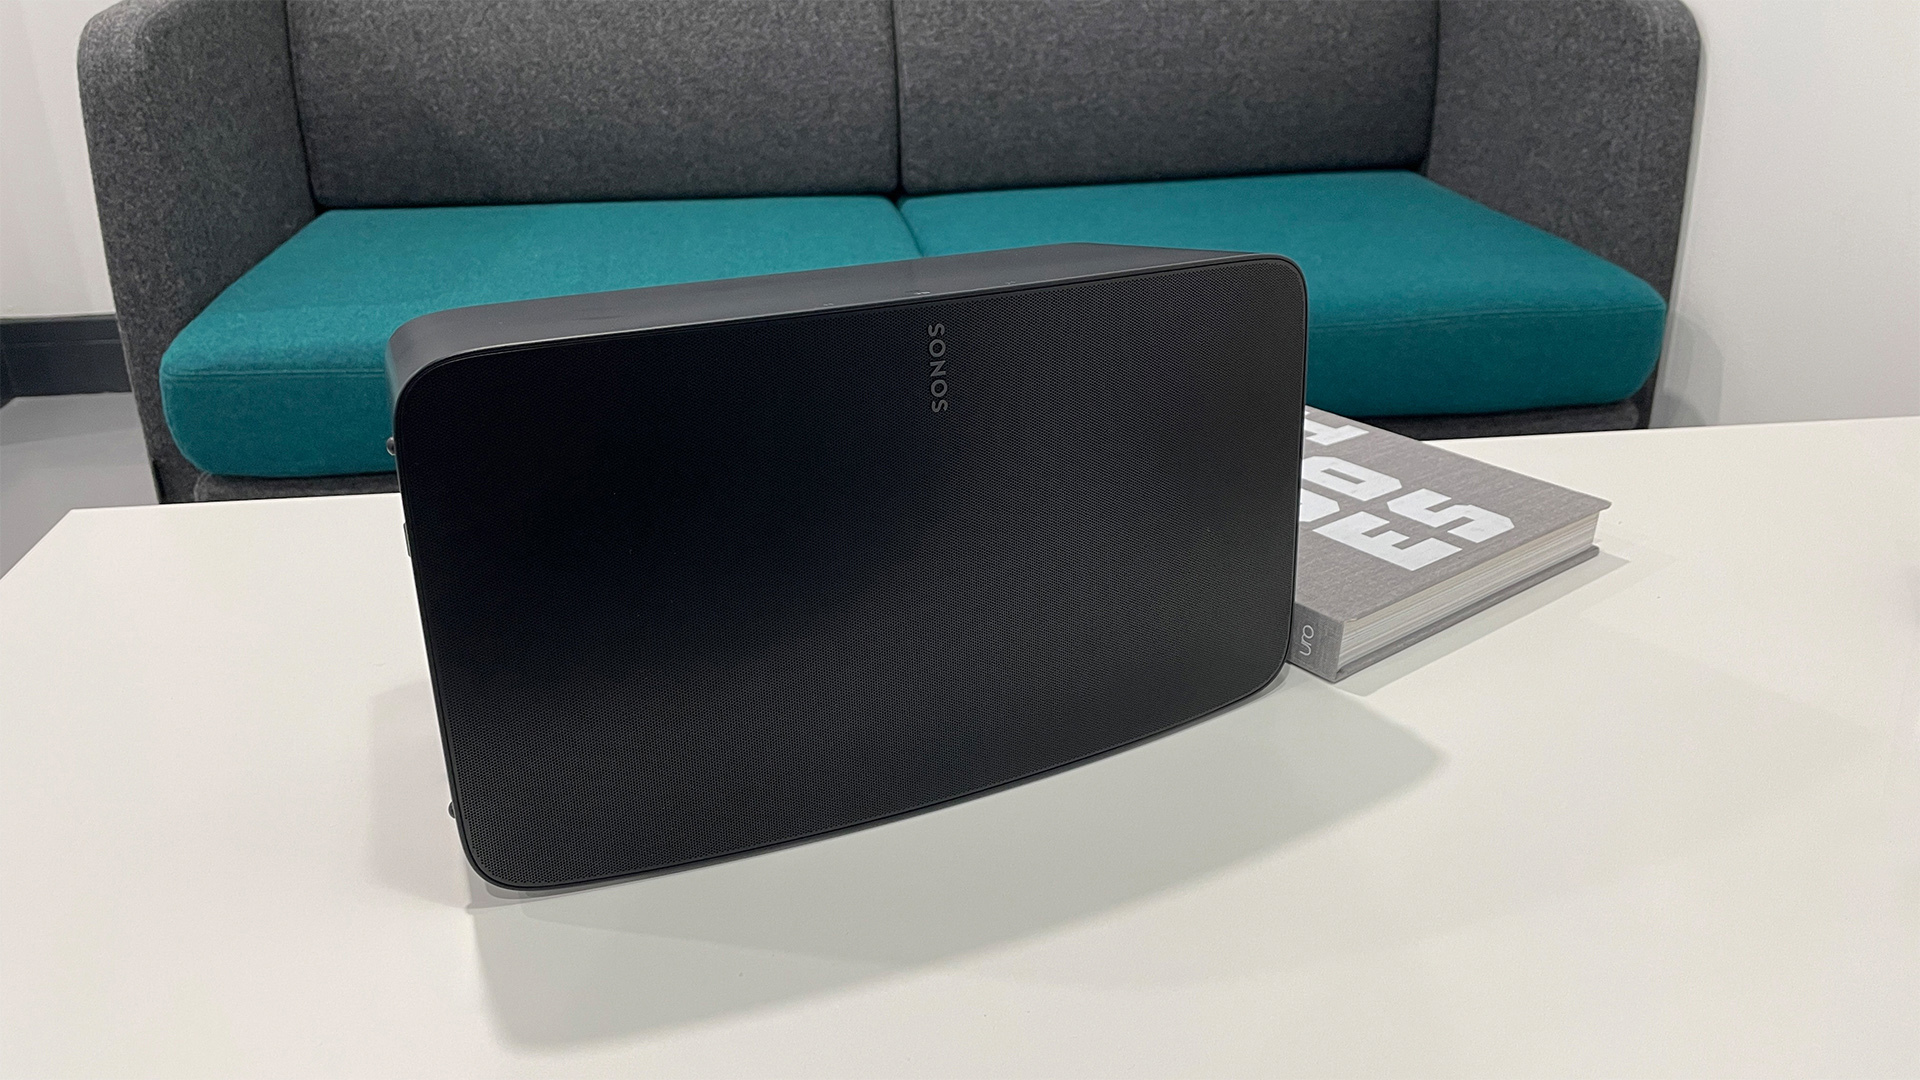 The Sonos Era could have the key audio feature I’ve always wanted